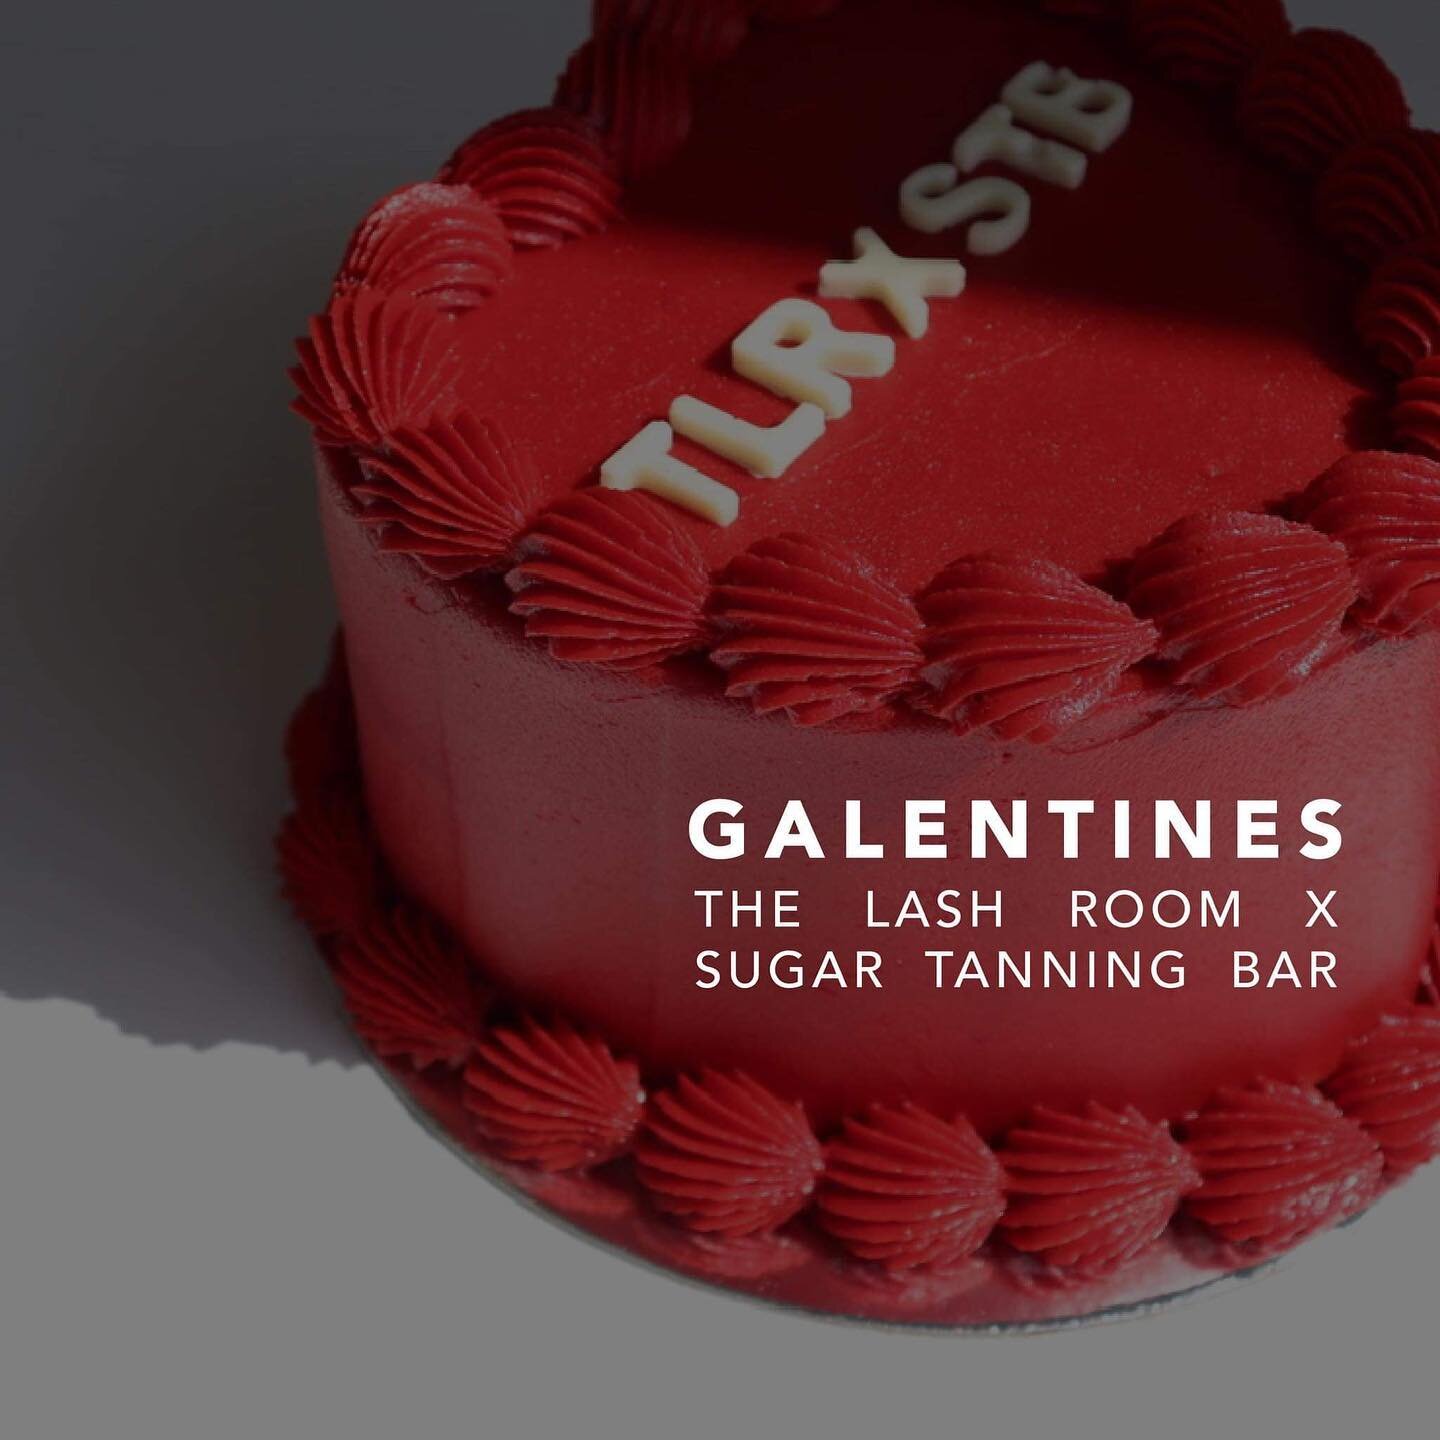 Valentines is a day for love, and we love spray tans with our lashes😉 bring a friend along for a Galentines day with us &amp; @thelashroom 🤎🤍